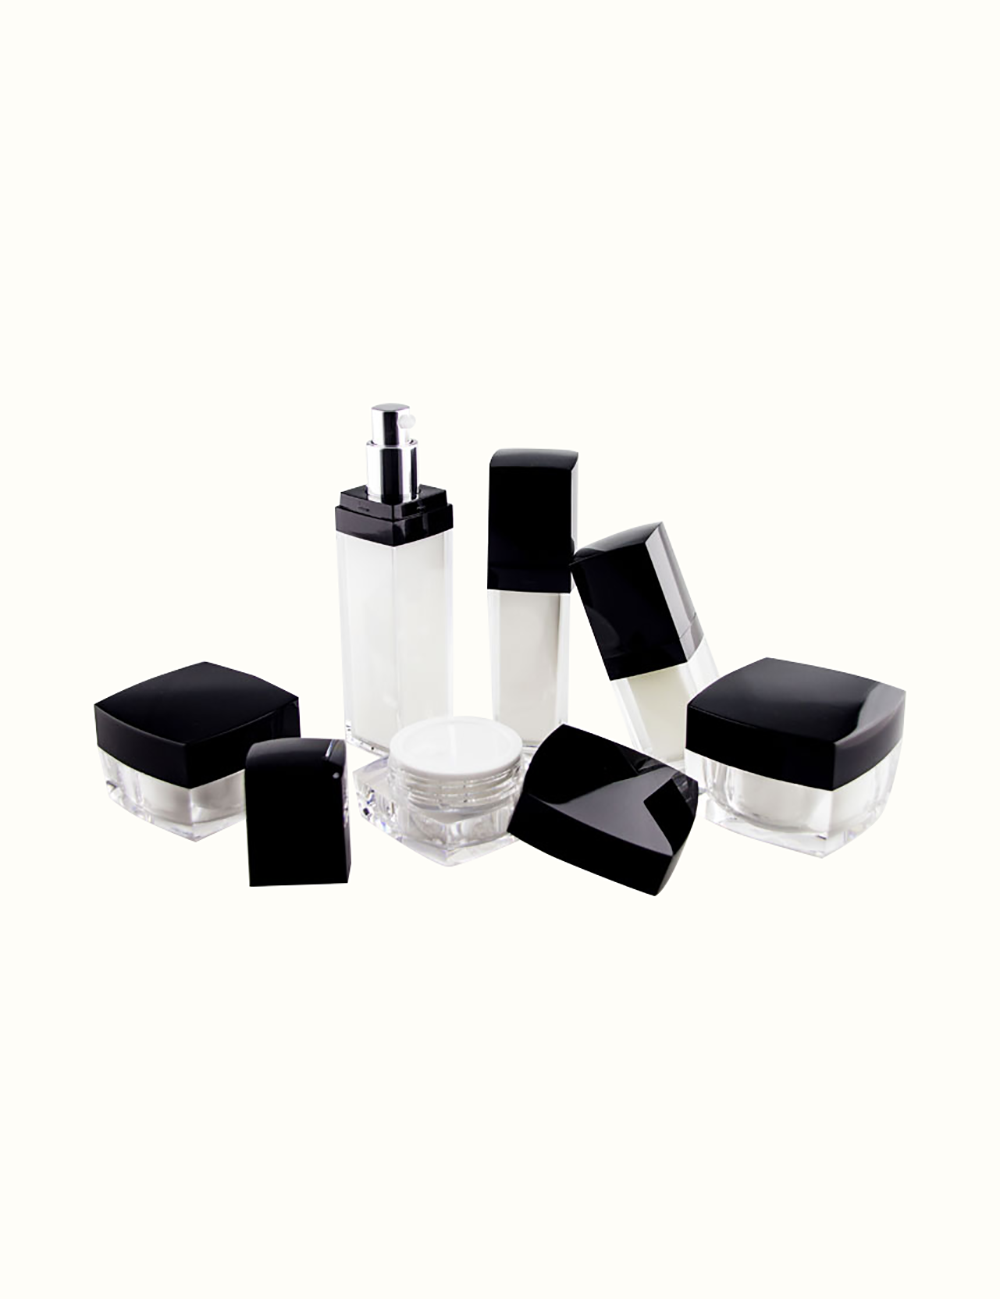 Square bottle acrylic cosmetic lontion bottle